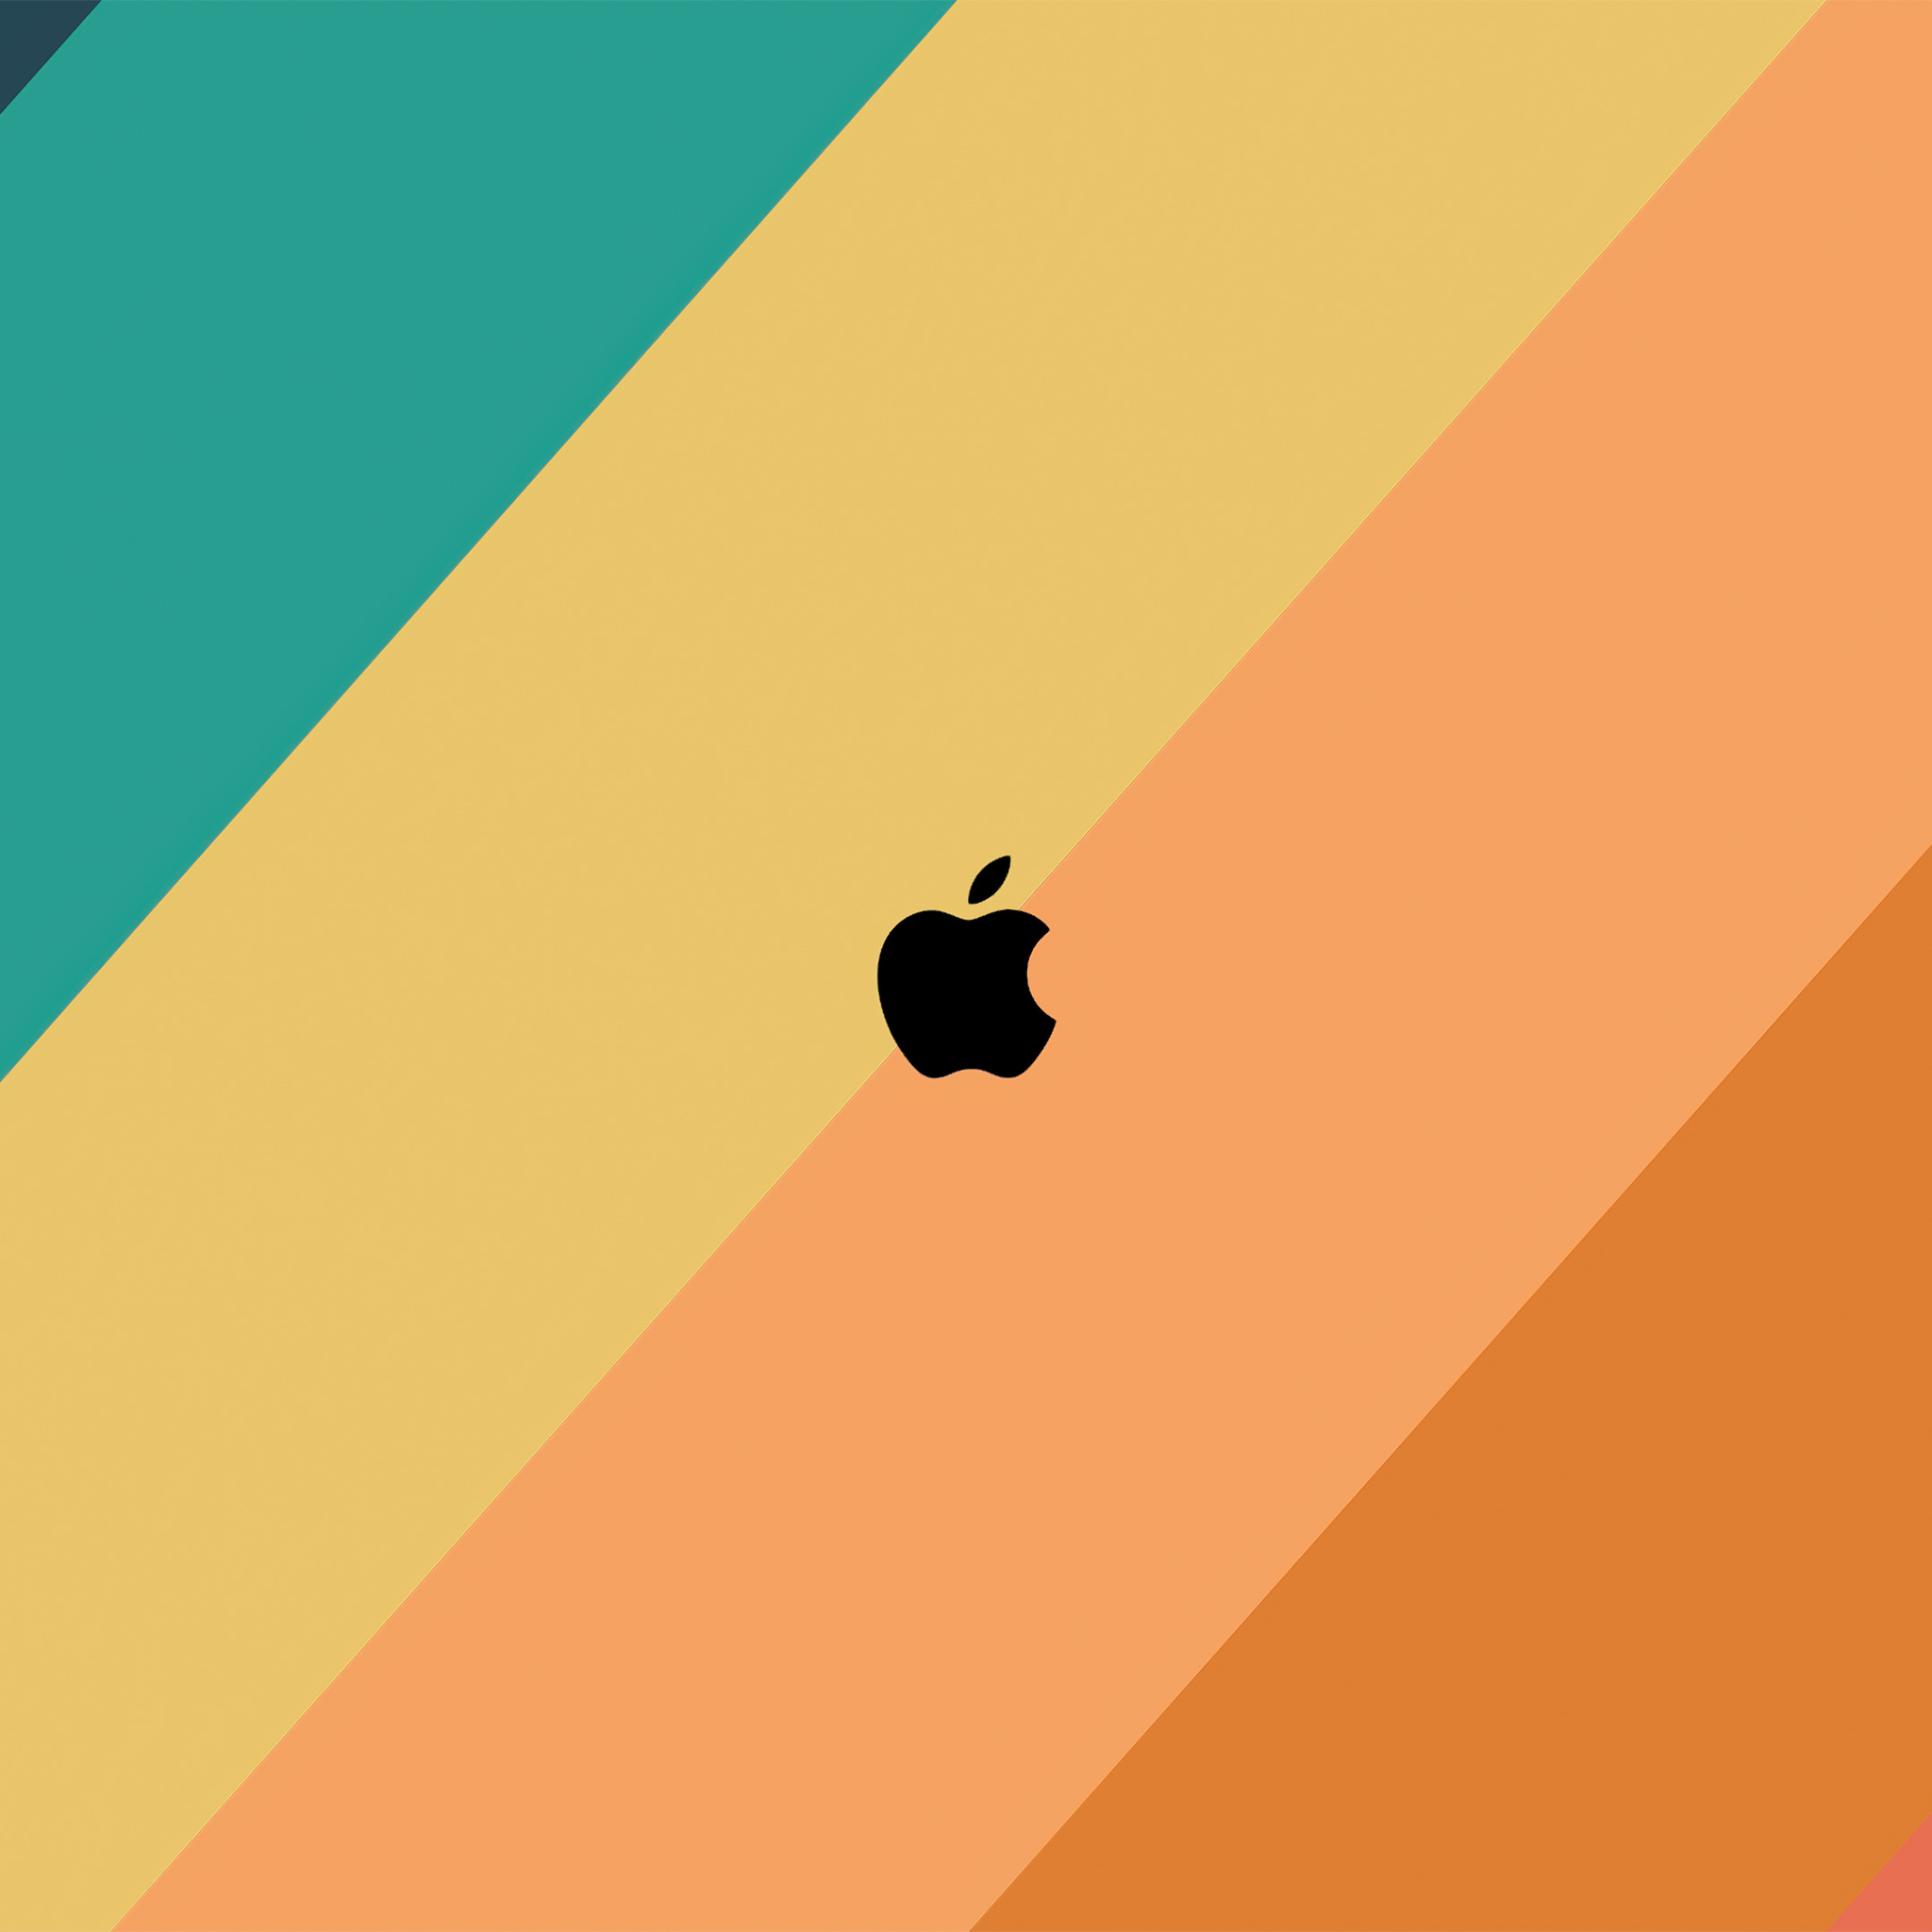 Apple Inc Minimal iPad Air HD 4k Wallpaper, Image, Background, Photo and Picture